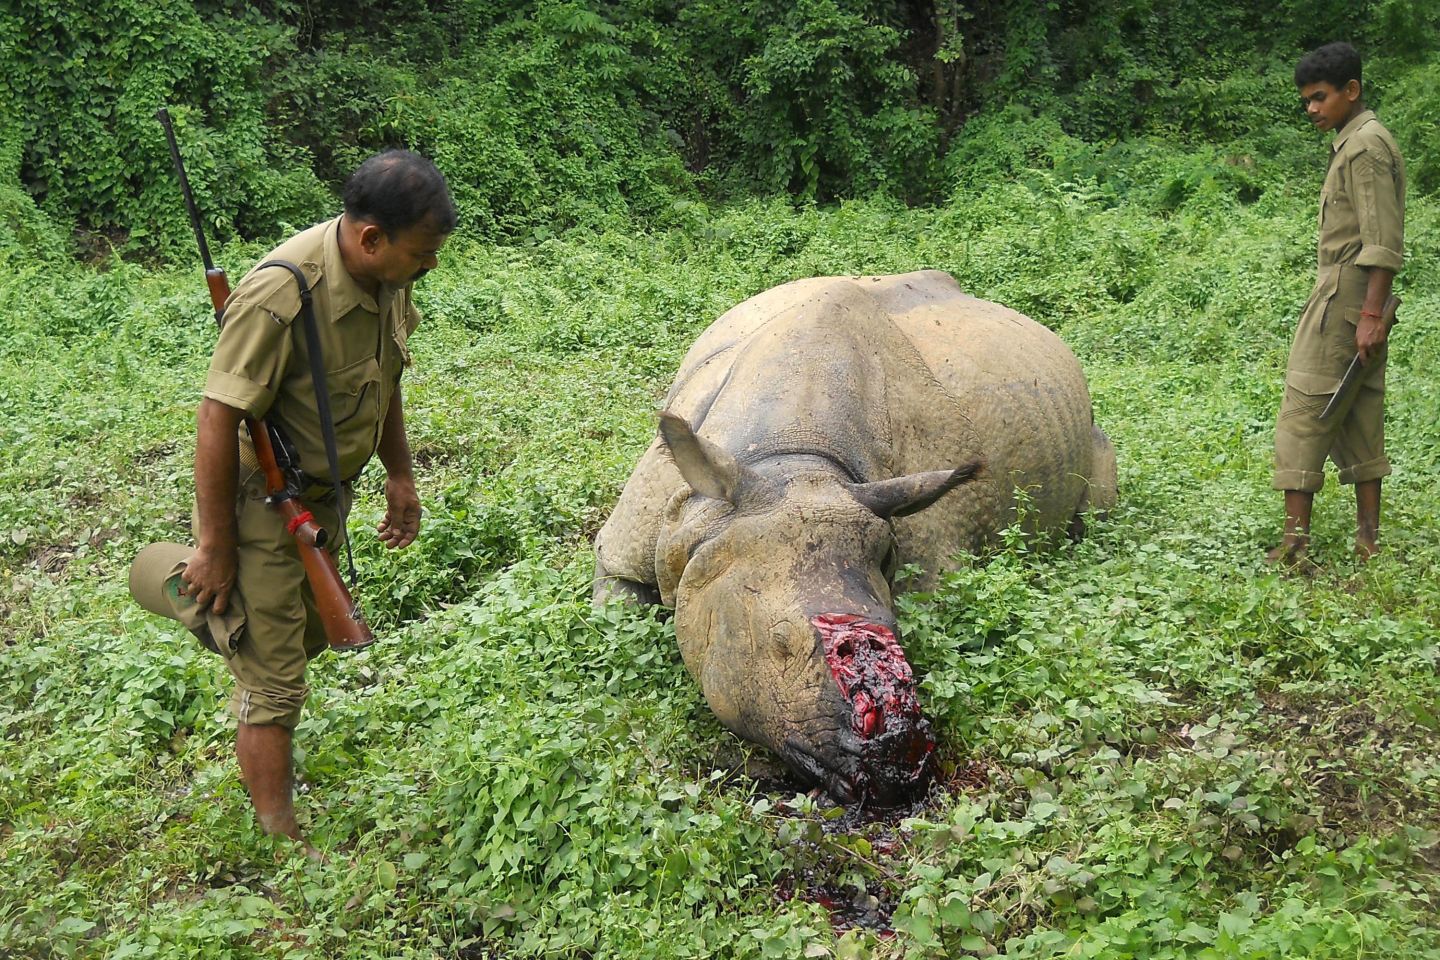 Indian forestry officials stand near the carcass of a one-horned rhinoceros which was killed and de-horned by poachers in Burapahar, a range of the Kaziranga National Park, in June 2015.